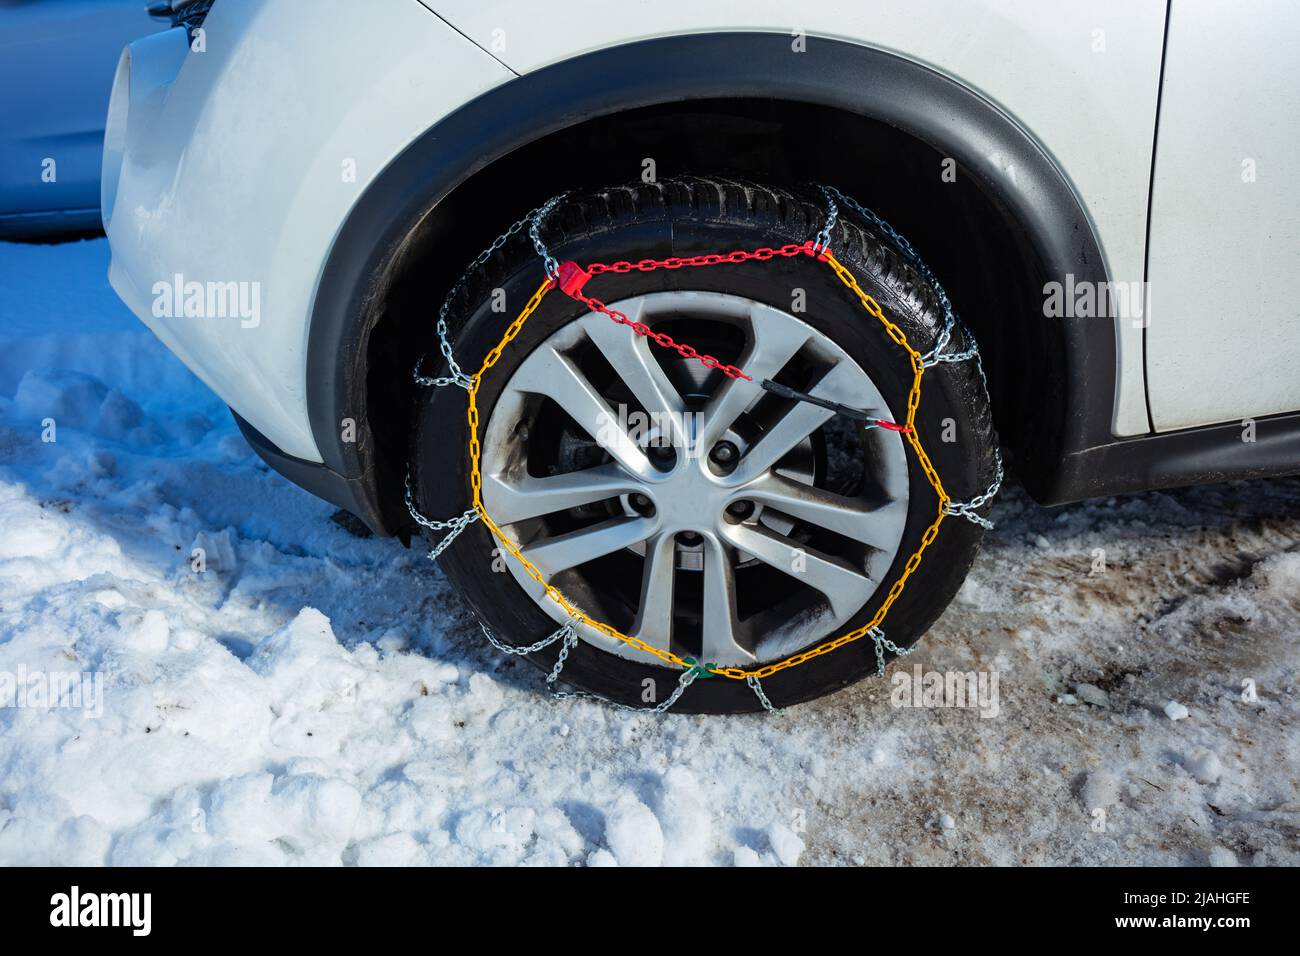 Snow chains on a car wheel close-up from side Stock Photo